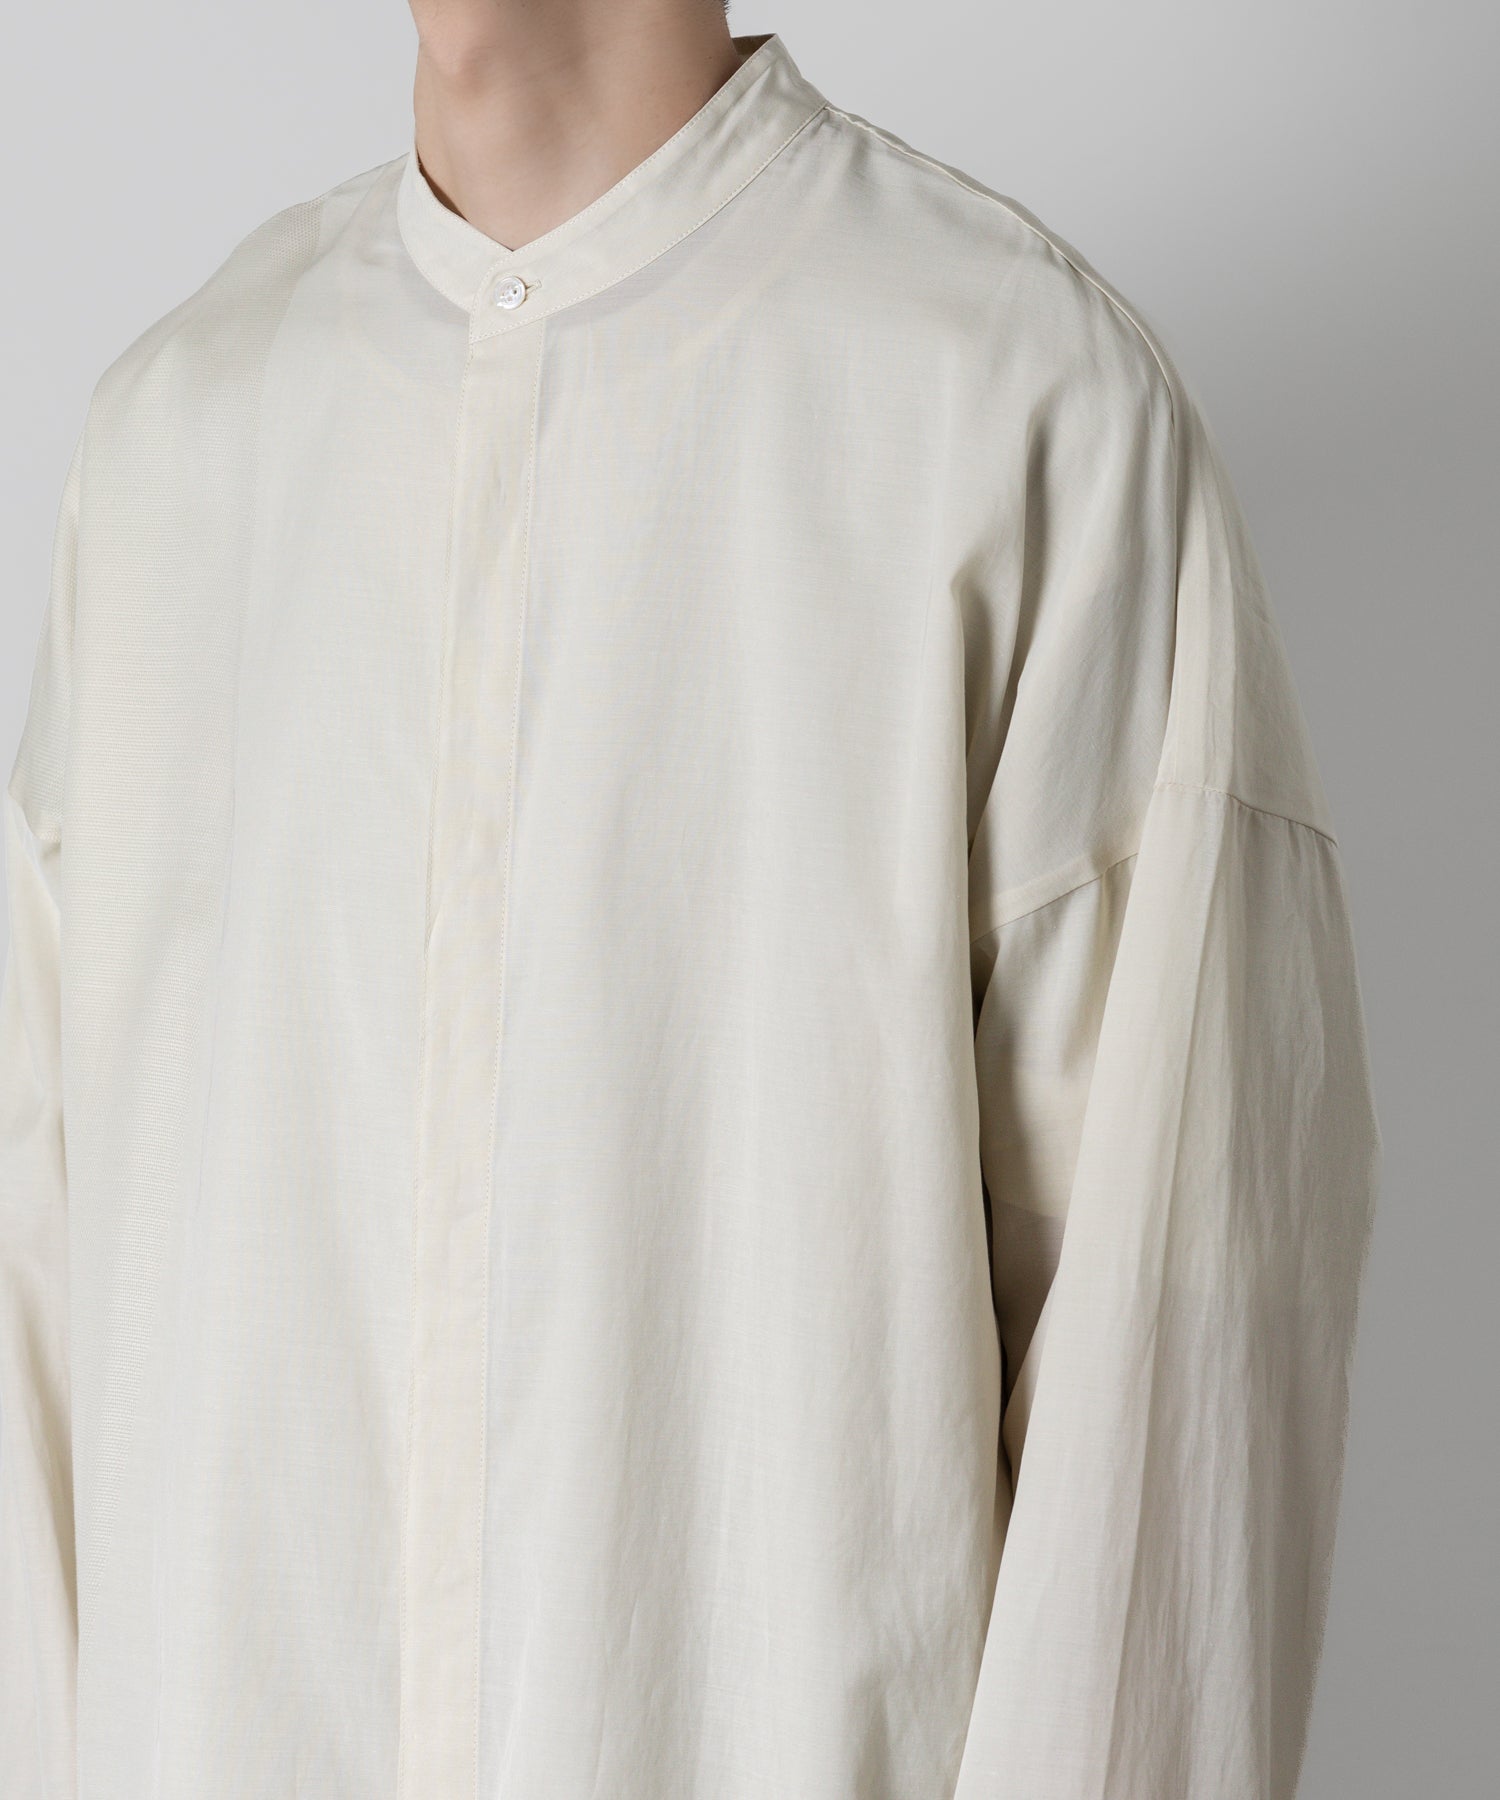 【ATTACHMENT】ATTACHMENT アタッチメントのRY/CO JACQUARD OVERSIZED BAND COLLAR L/S - OFF WITE 公式通販サイトsession福岡セレクトショップ